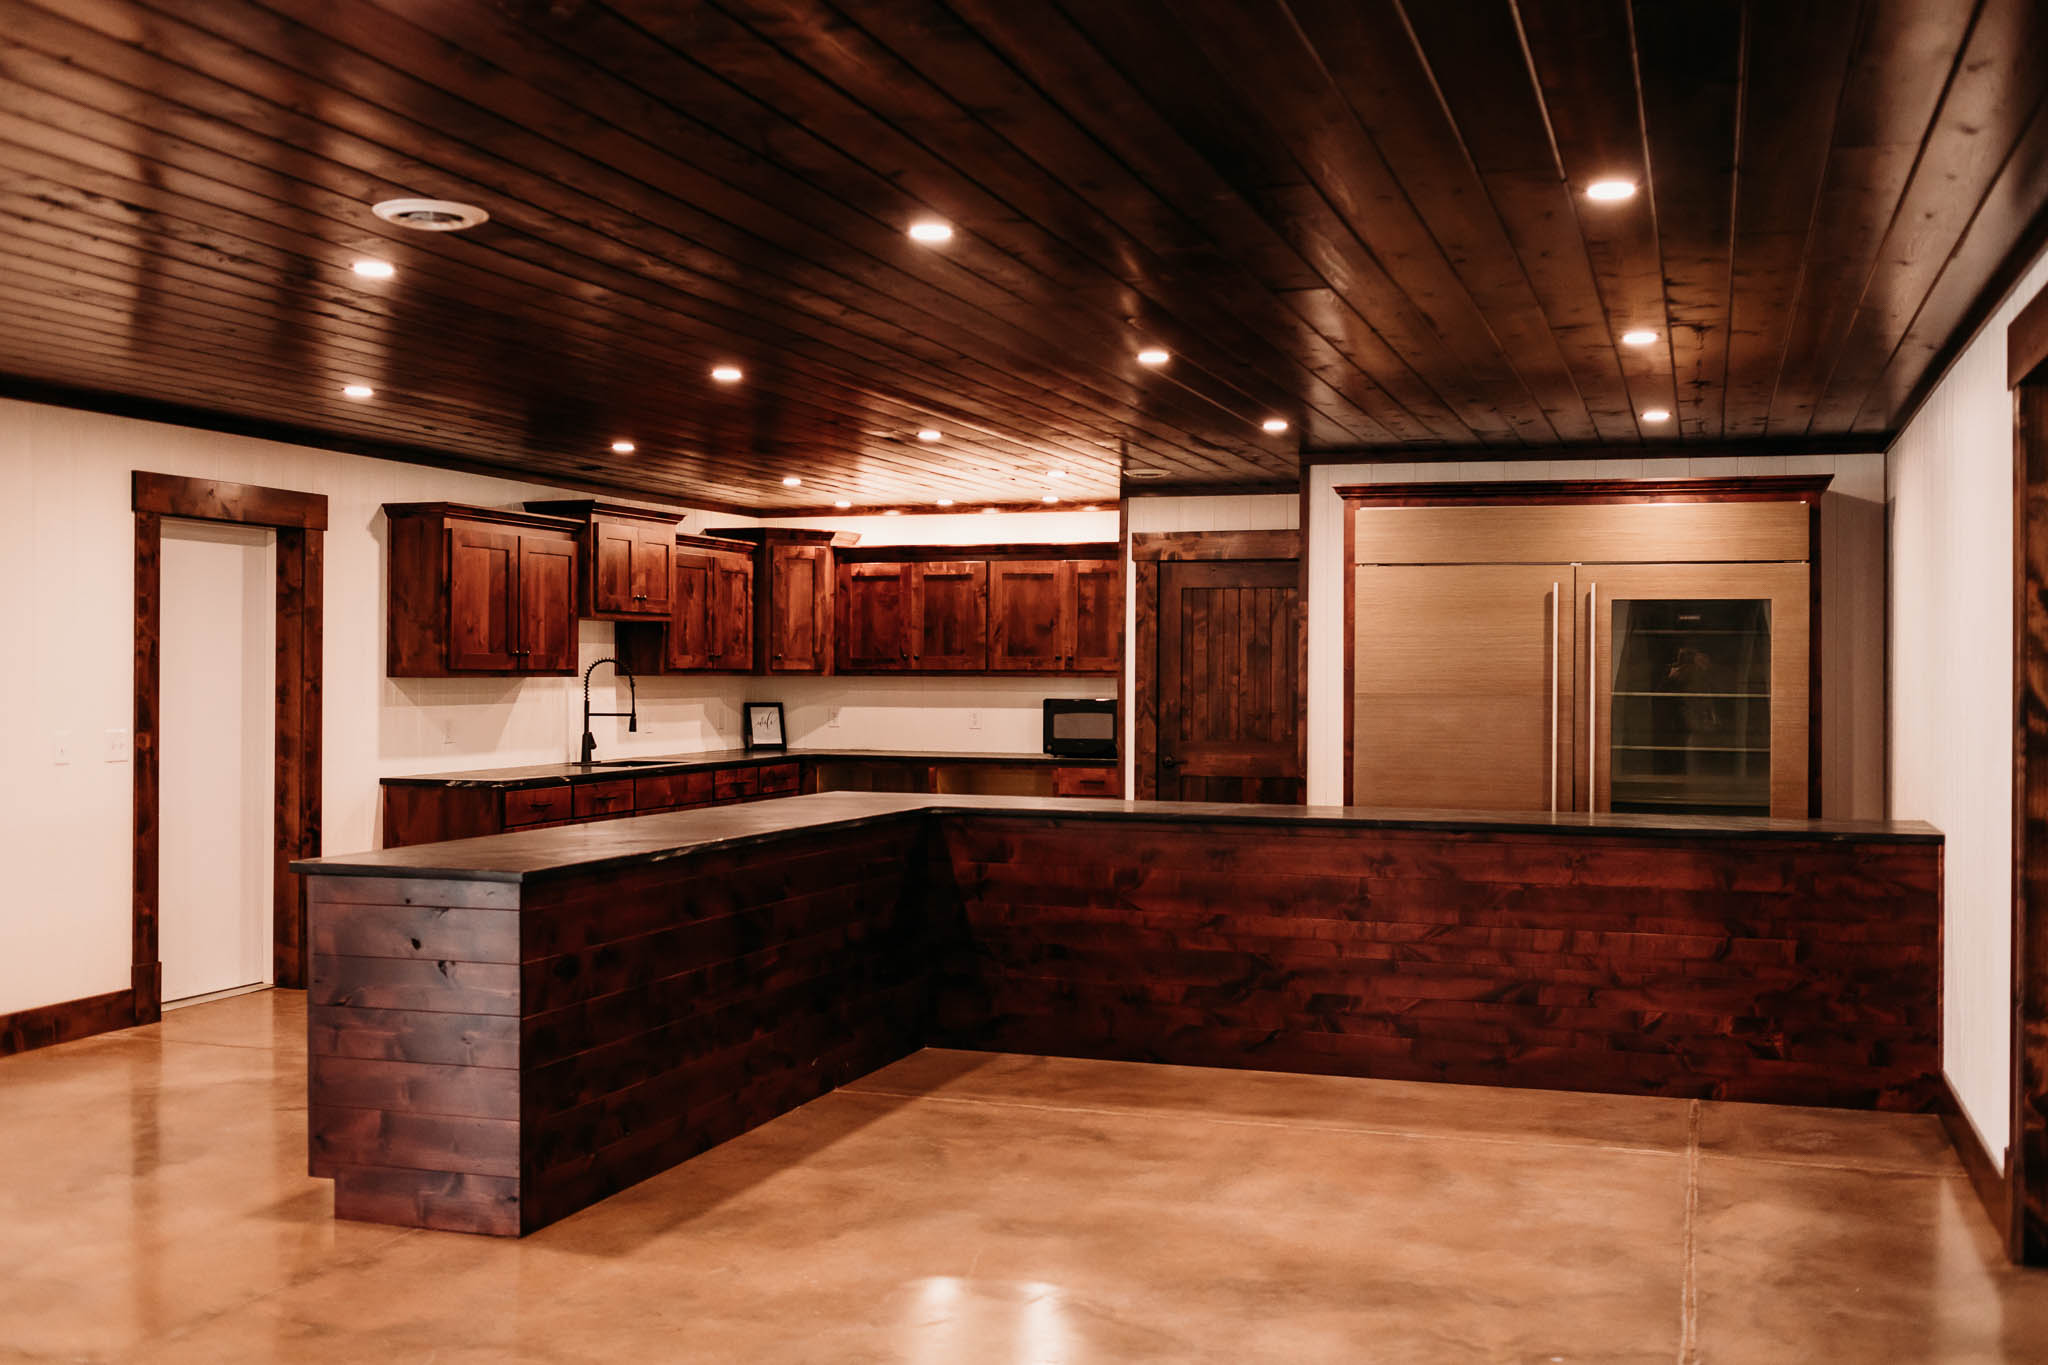 The caterer's kitchen in The VeNue Event Space. The kitchen cabinets are a dark walnut finish there is a large refrigerator on the right side and microwave, sink and warming drawers on the left side.